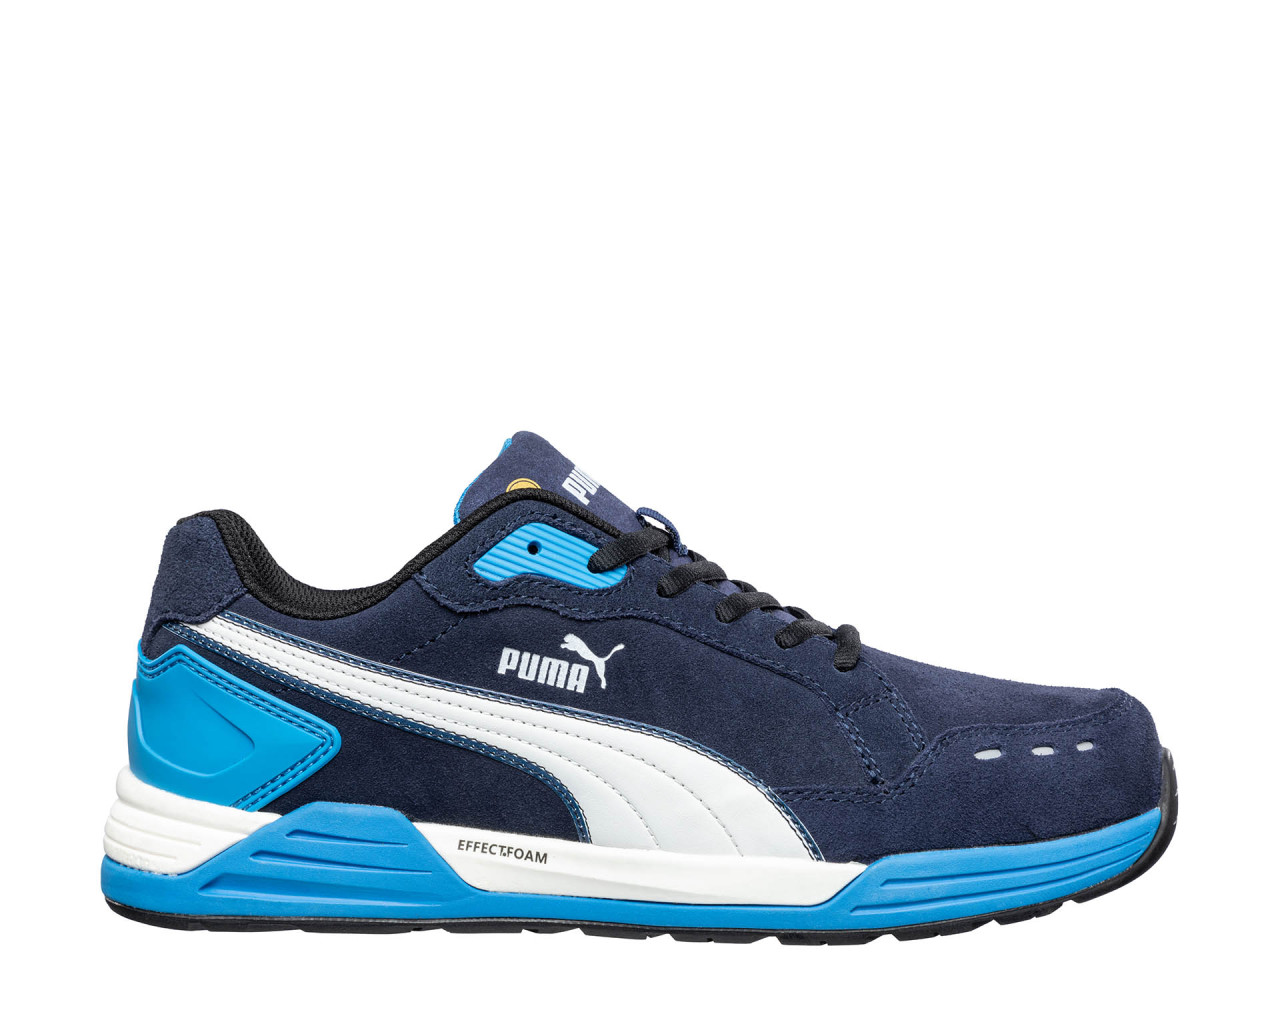 PUMA SAFETY AIRTWIST BLUE LOW S3 ESD 